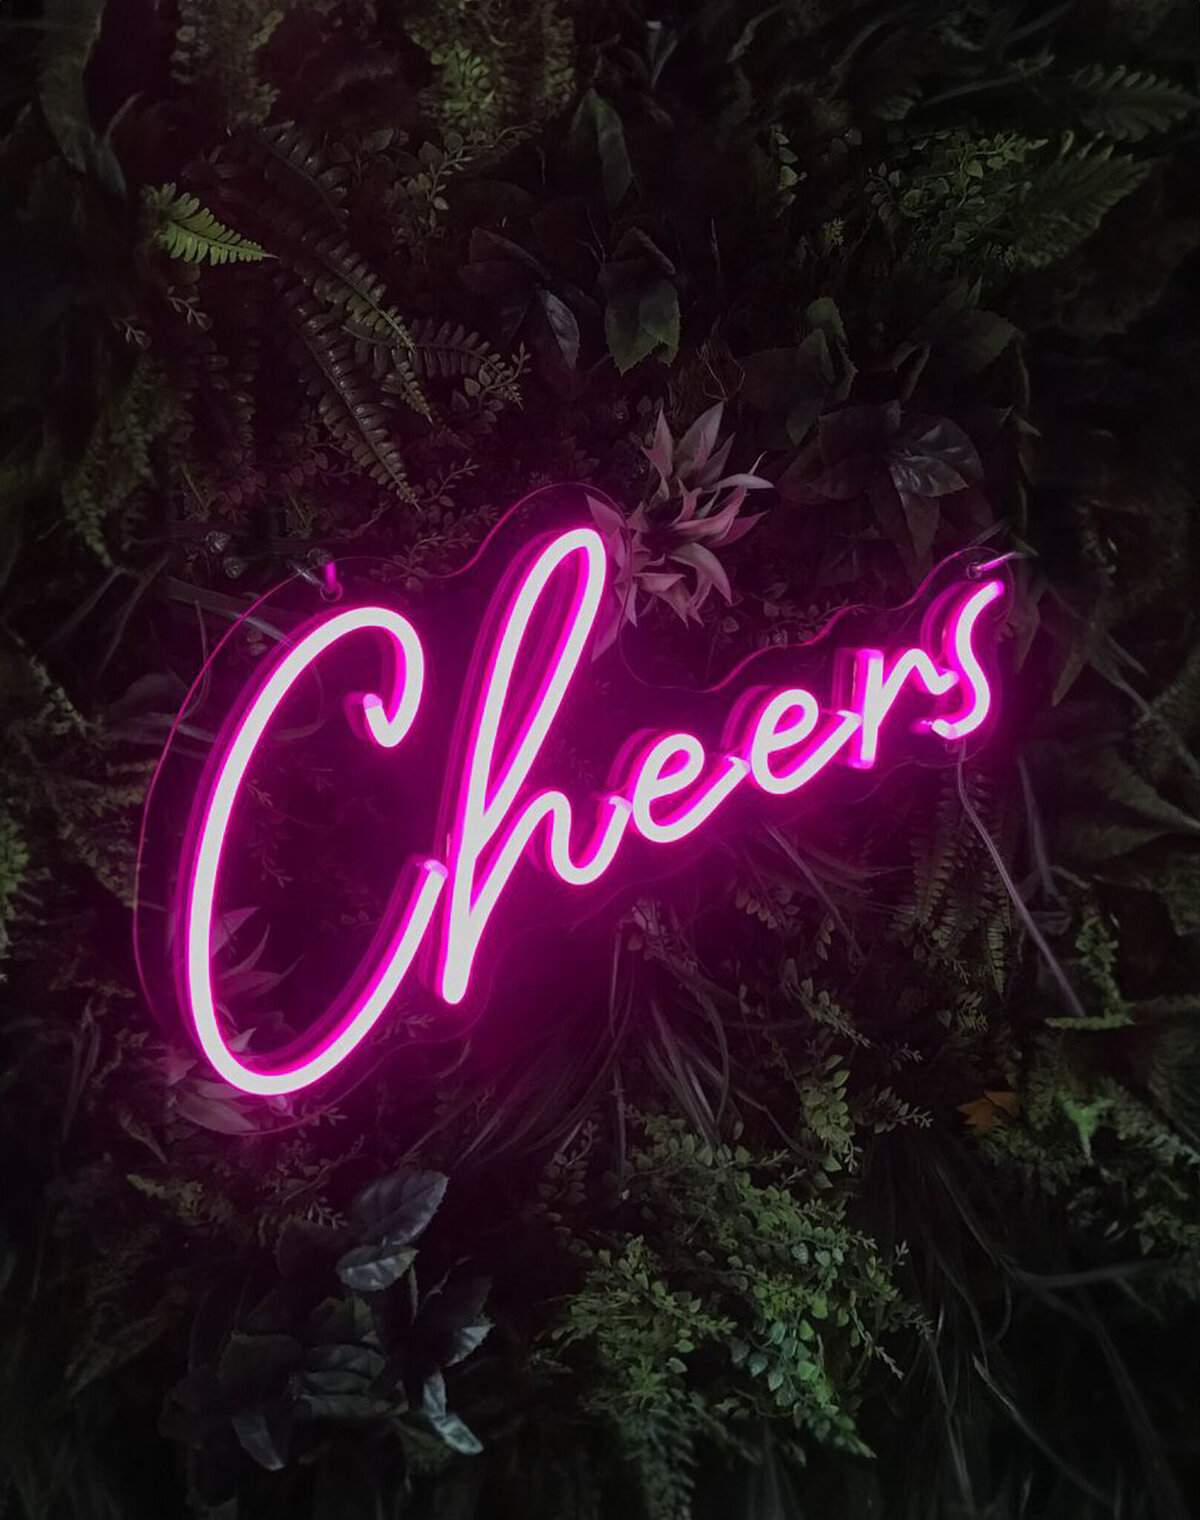 Cheers sign in pink from Love In Bloom, neon sign decor rentals based in Lethbridge, AB. Featured on the Brontë Bride Vendor Guide.